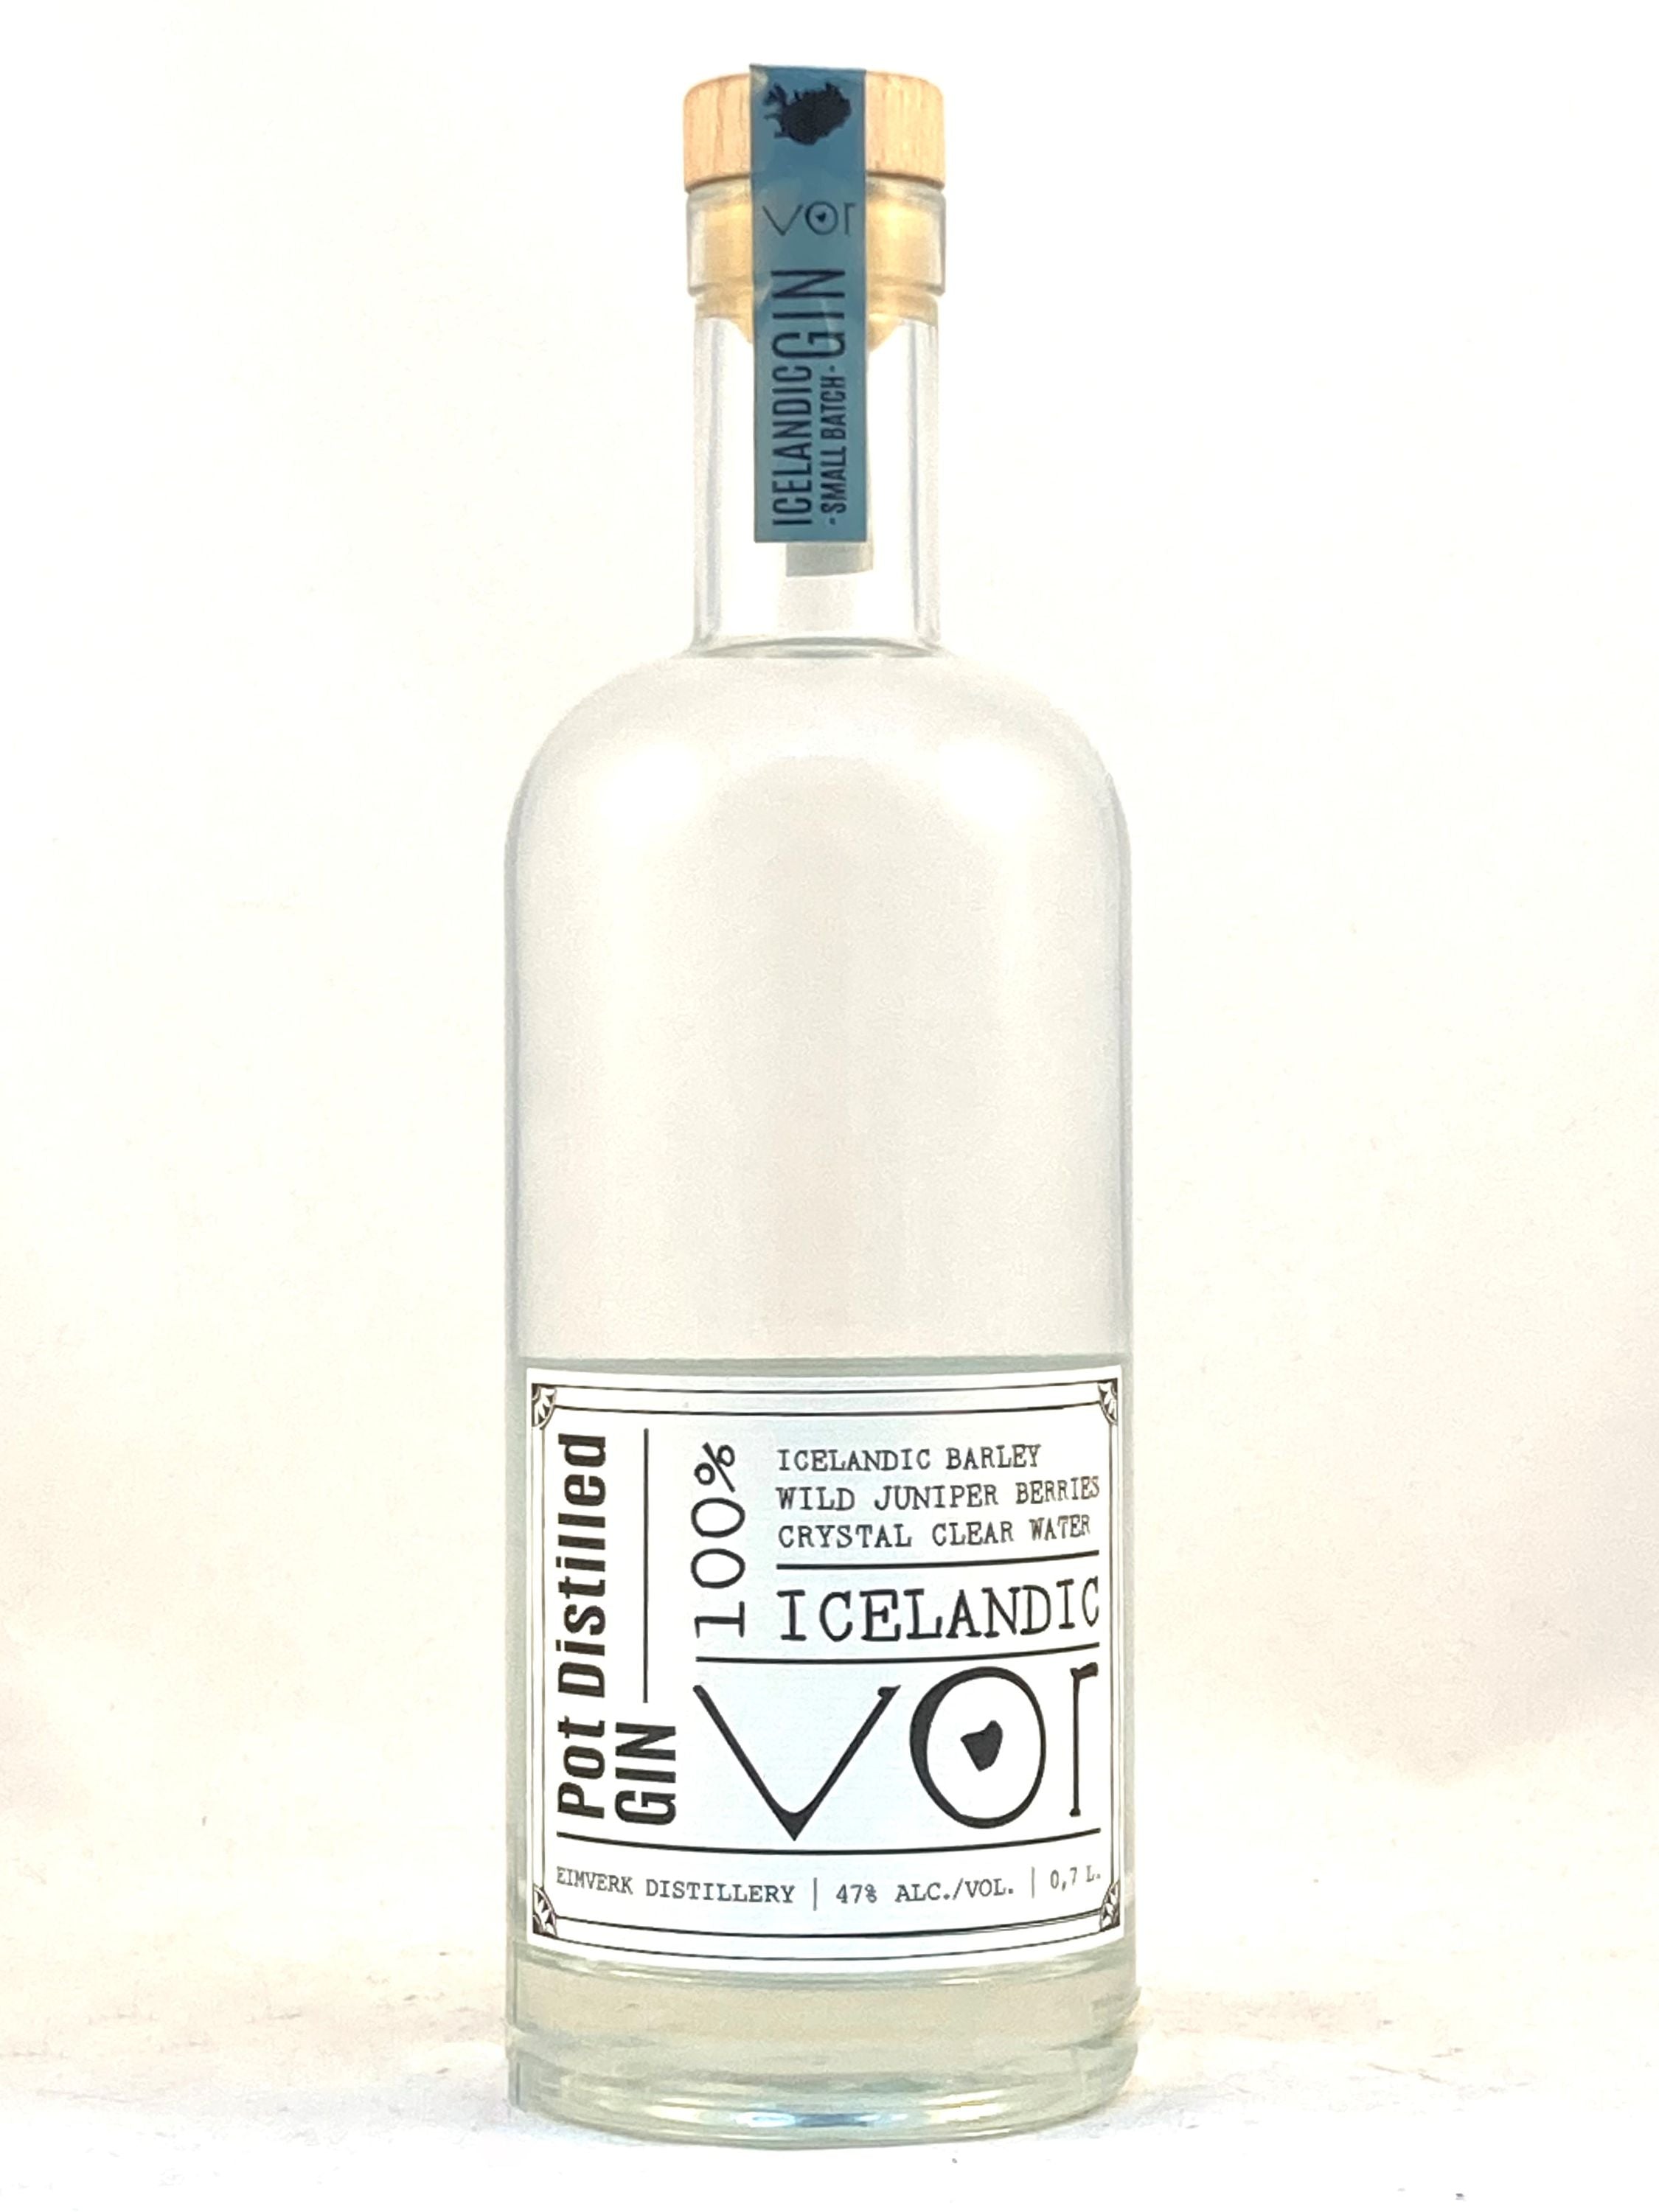 Before Icelandic Gin 0.7l, alc. 47% by volume